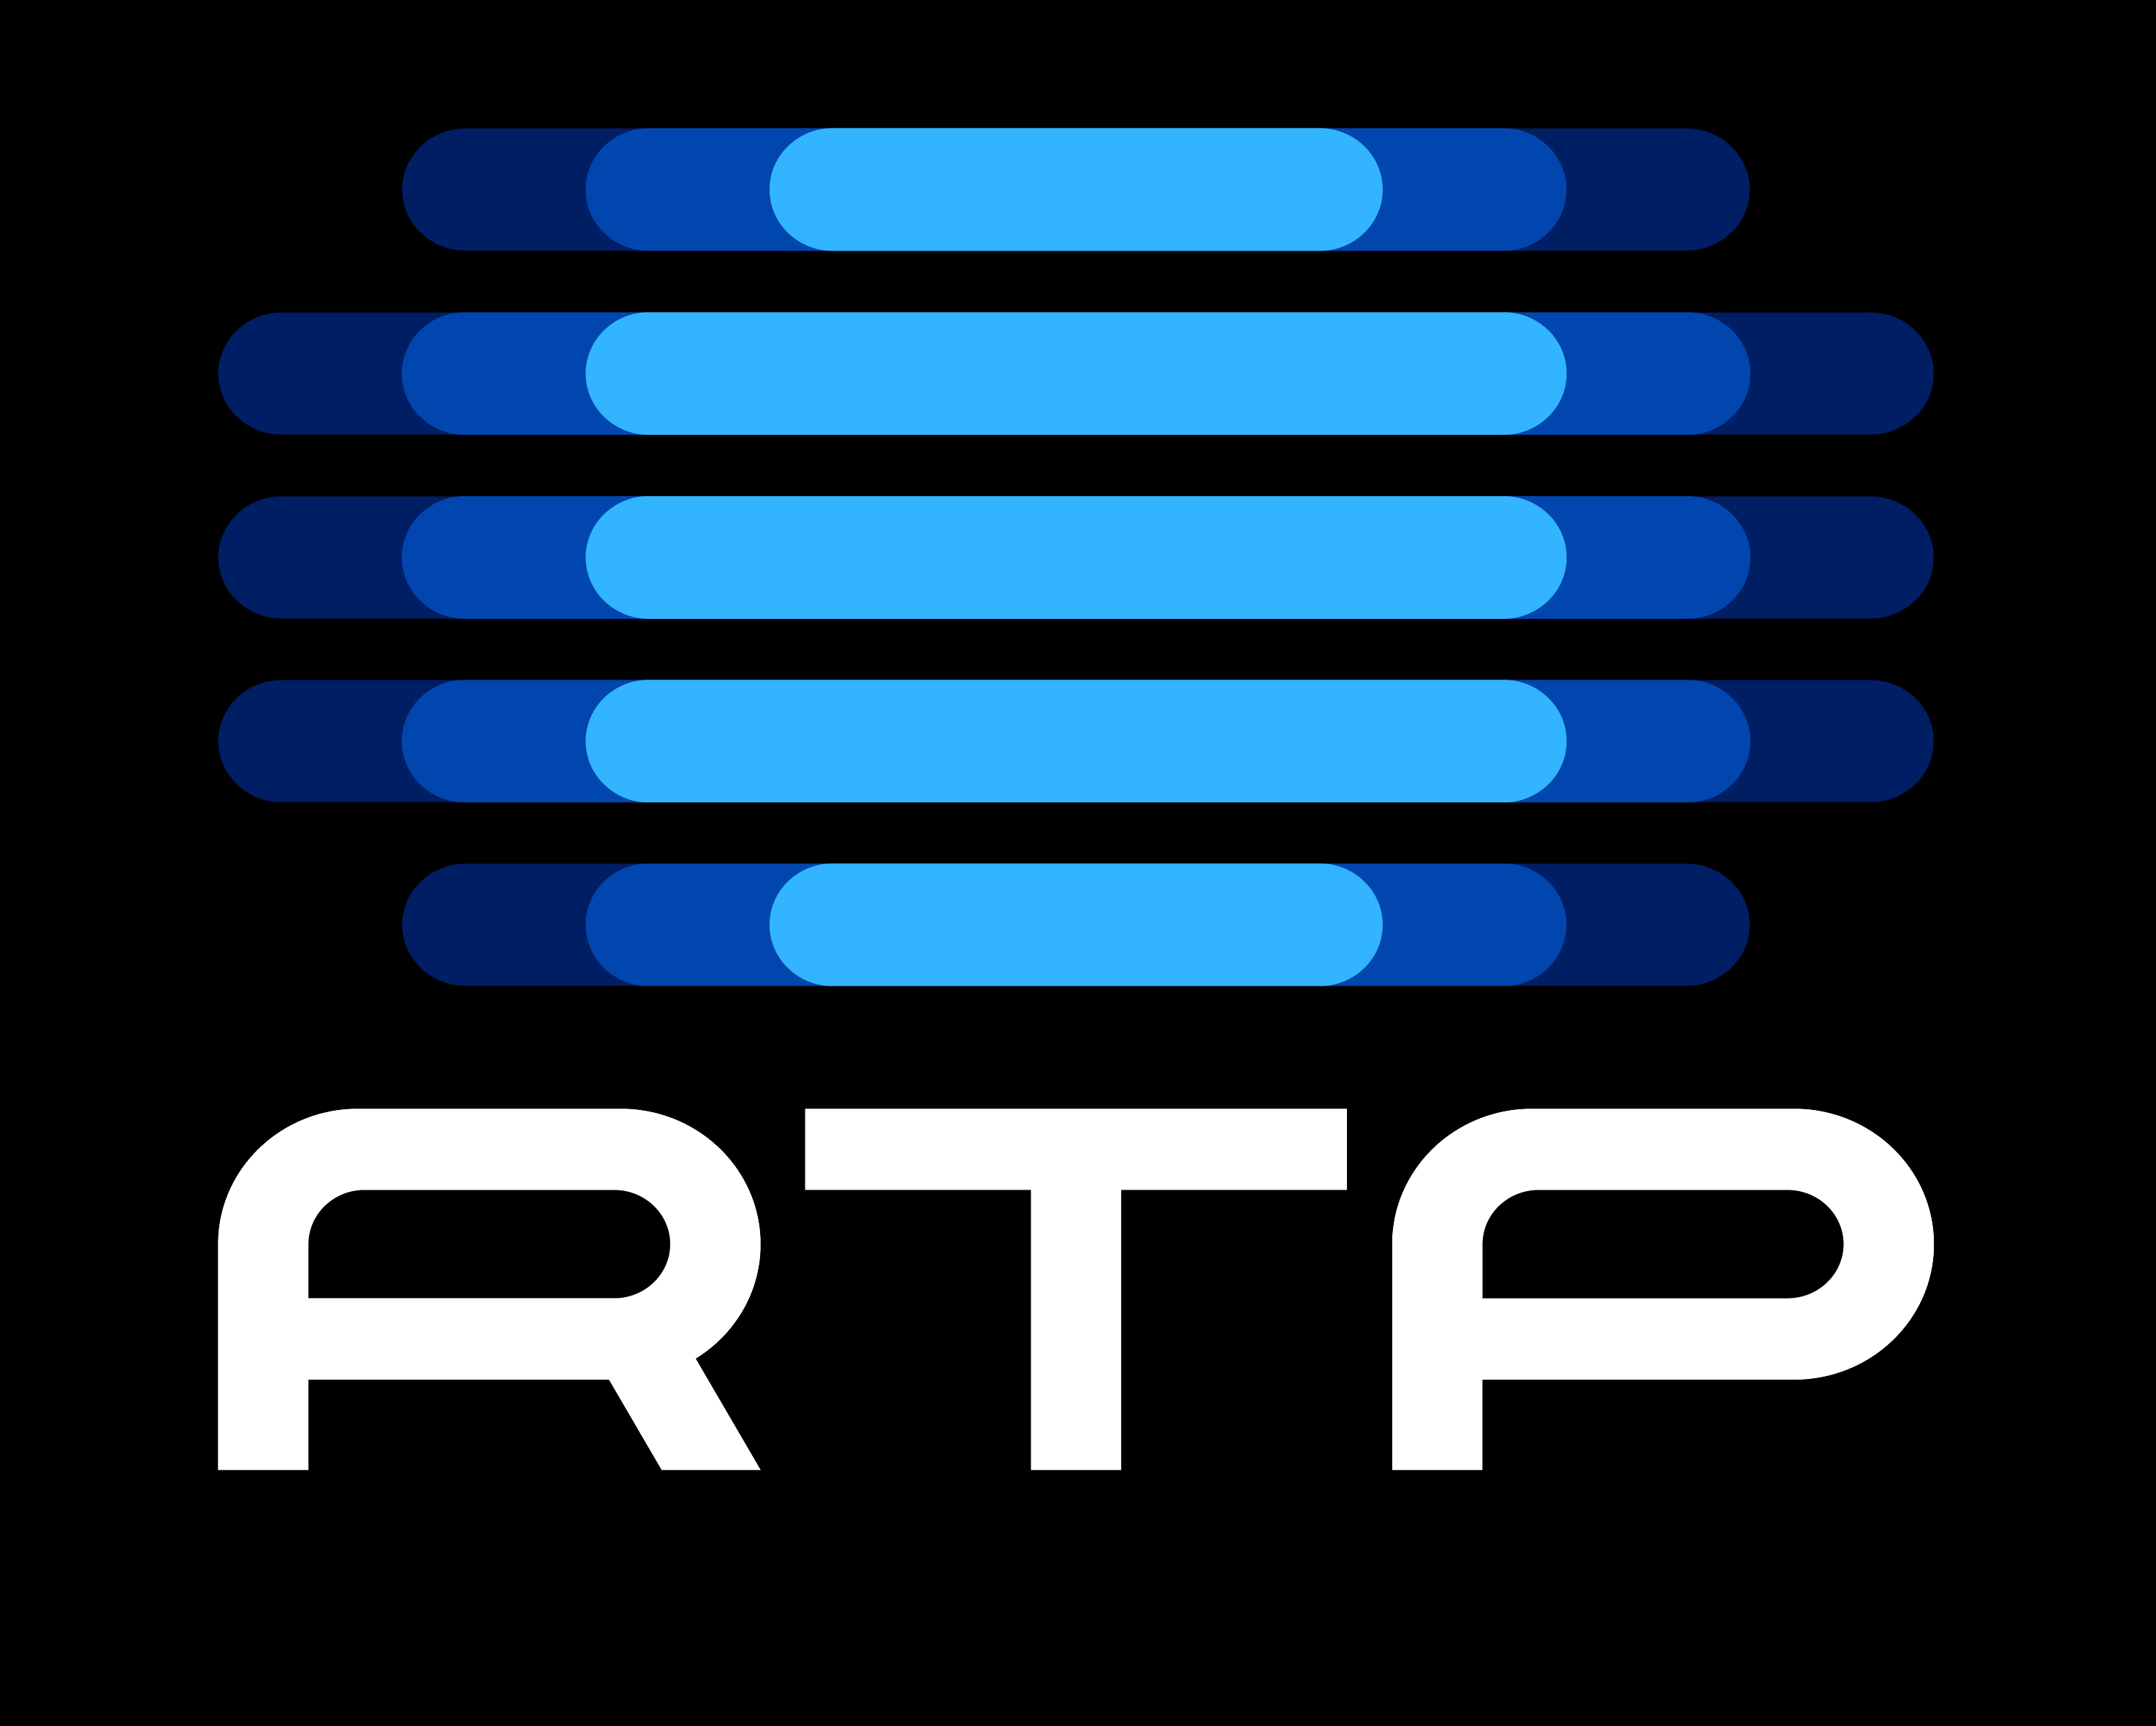 Public Television Rtp 1 To Be Privatized In 2012 Portugal Portuguese American Journal